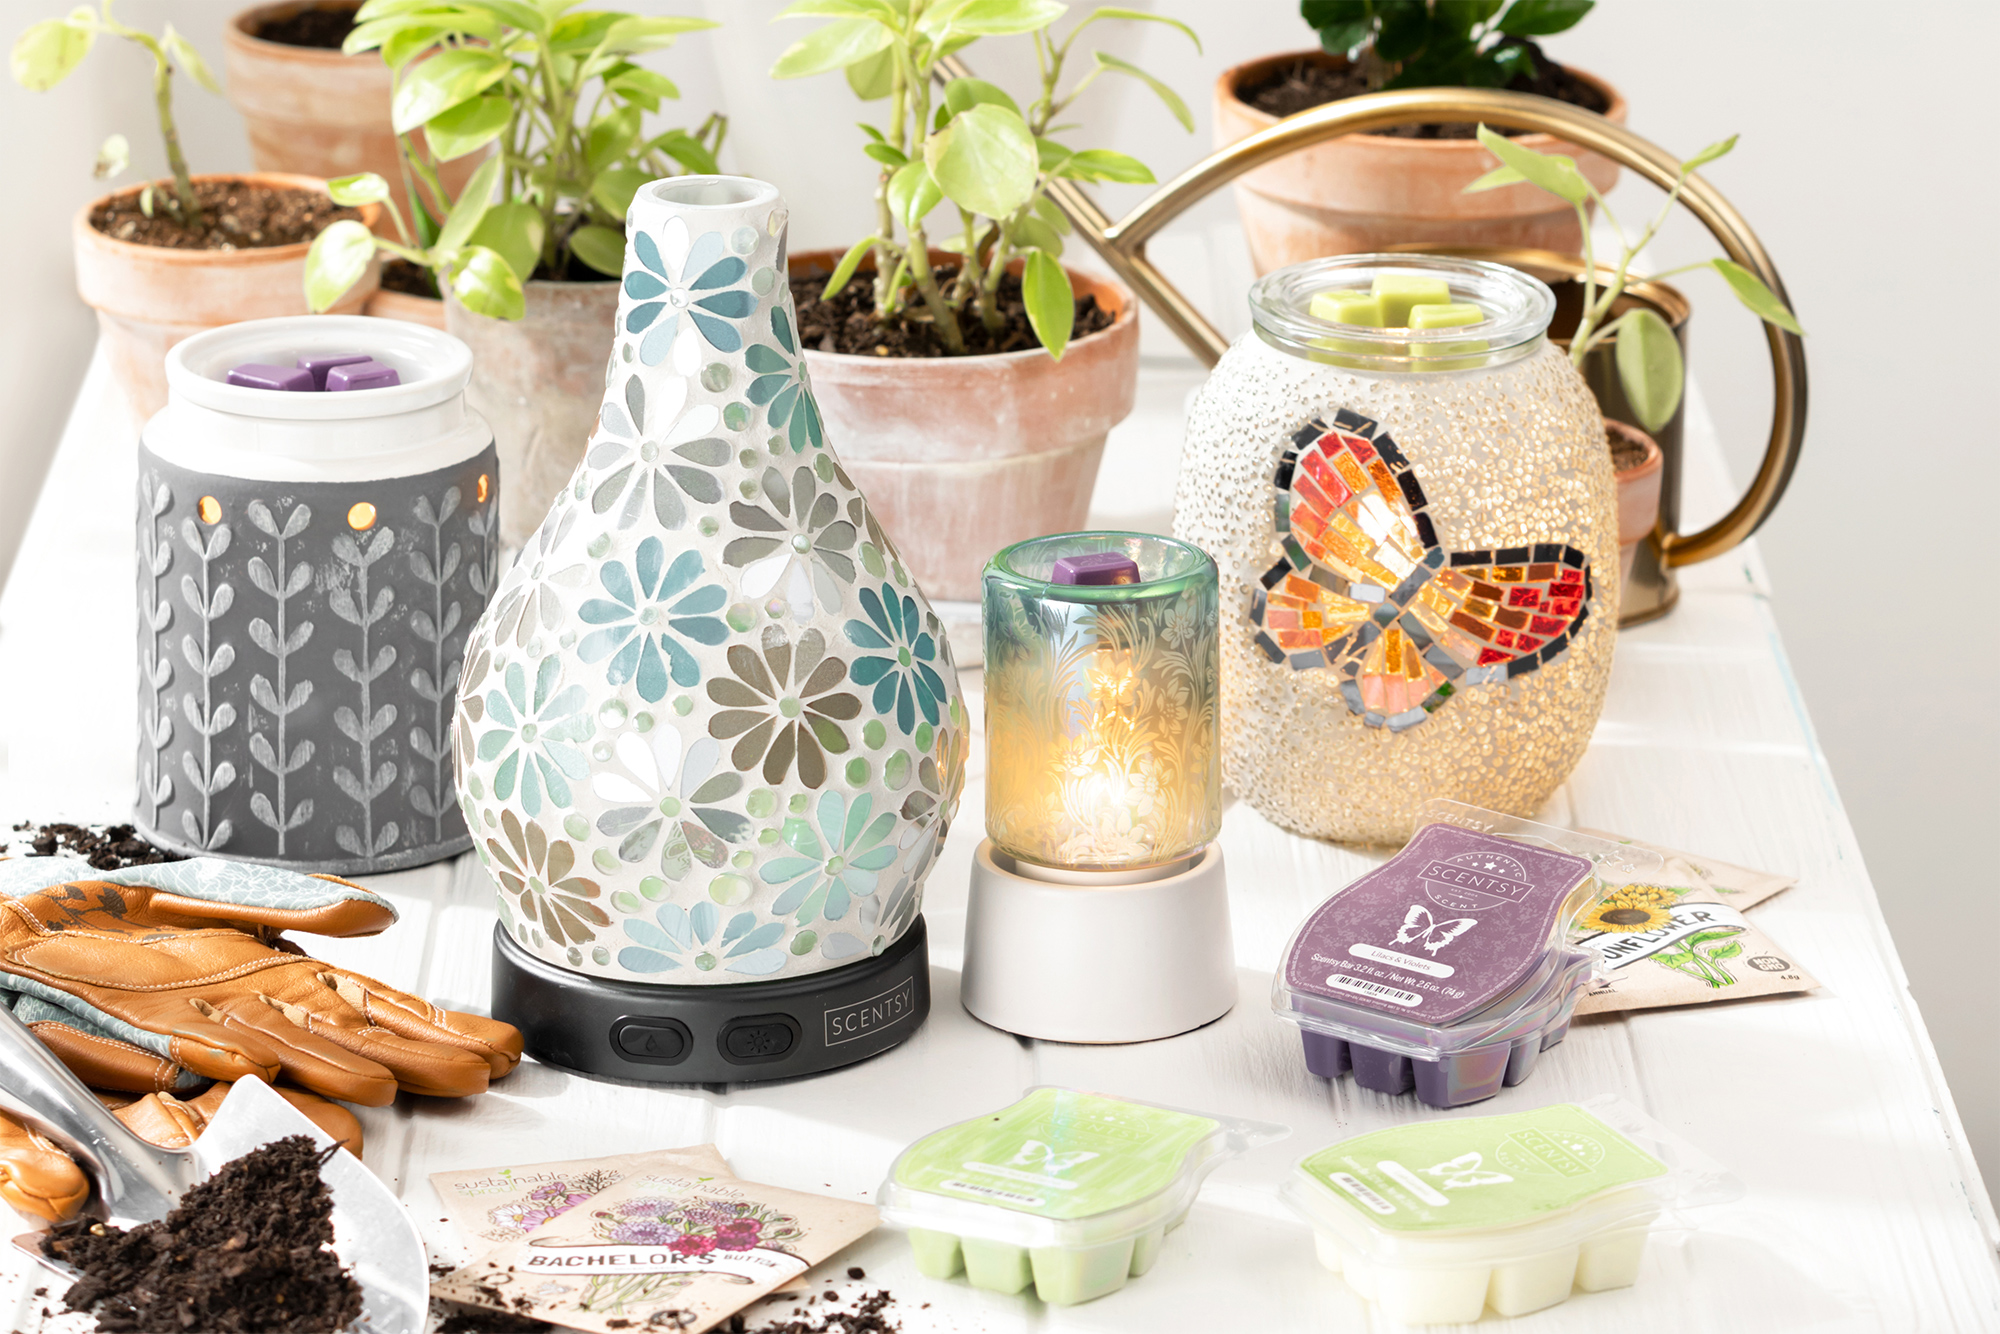 Spring inspired Scentsy products